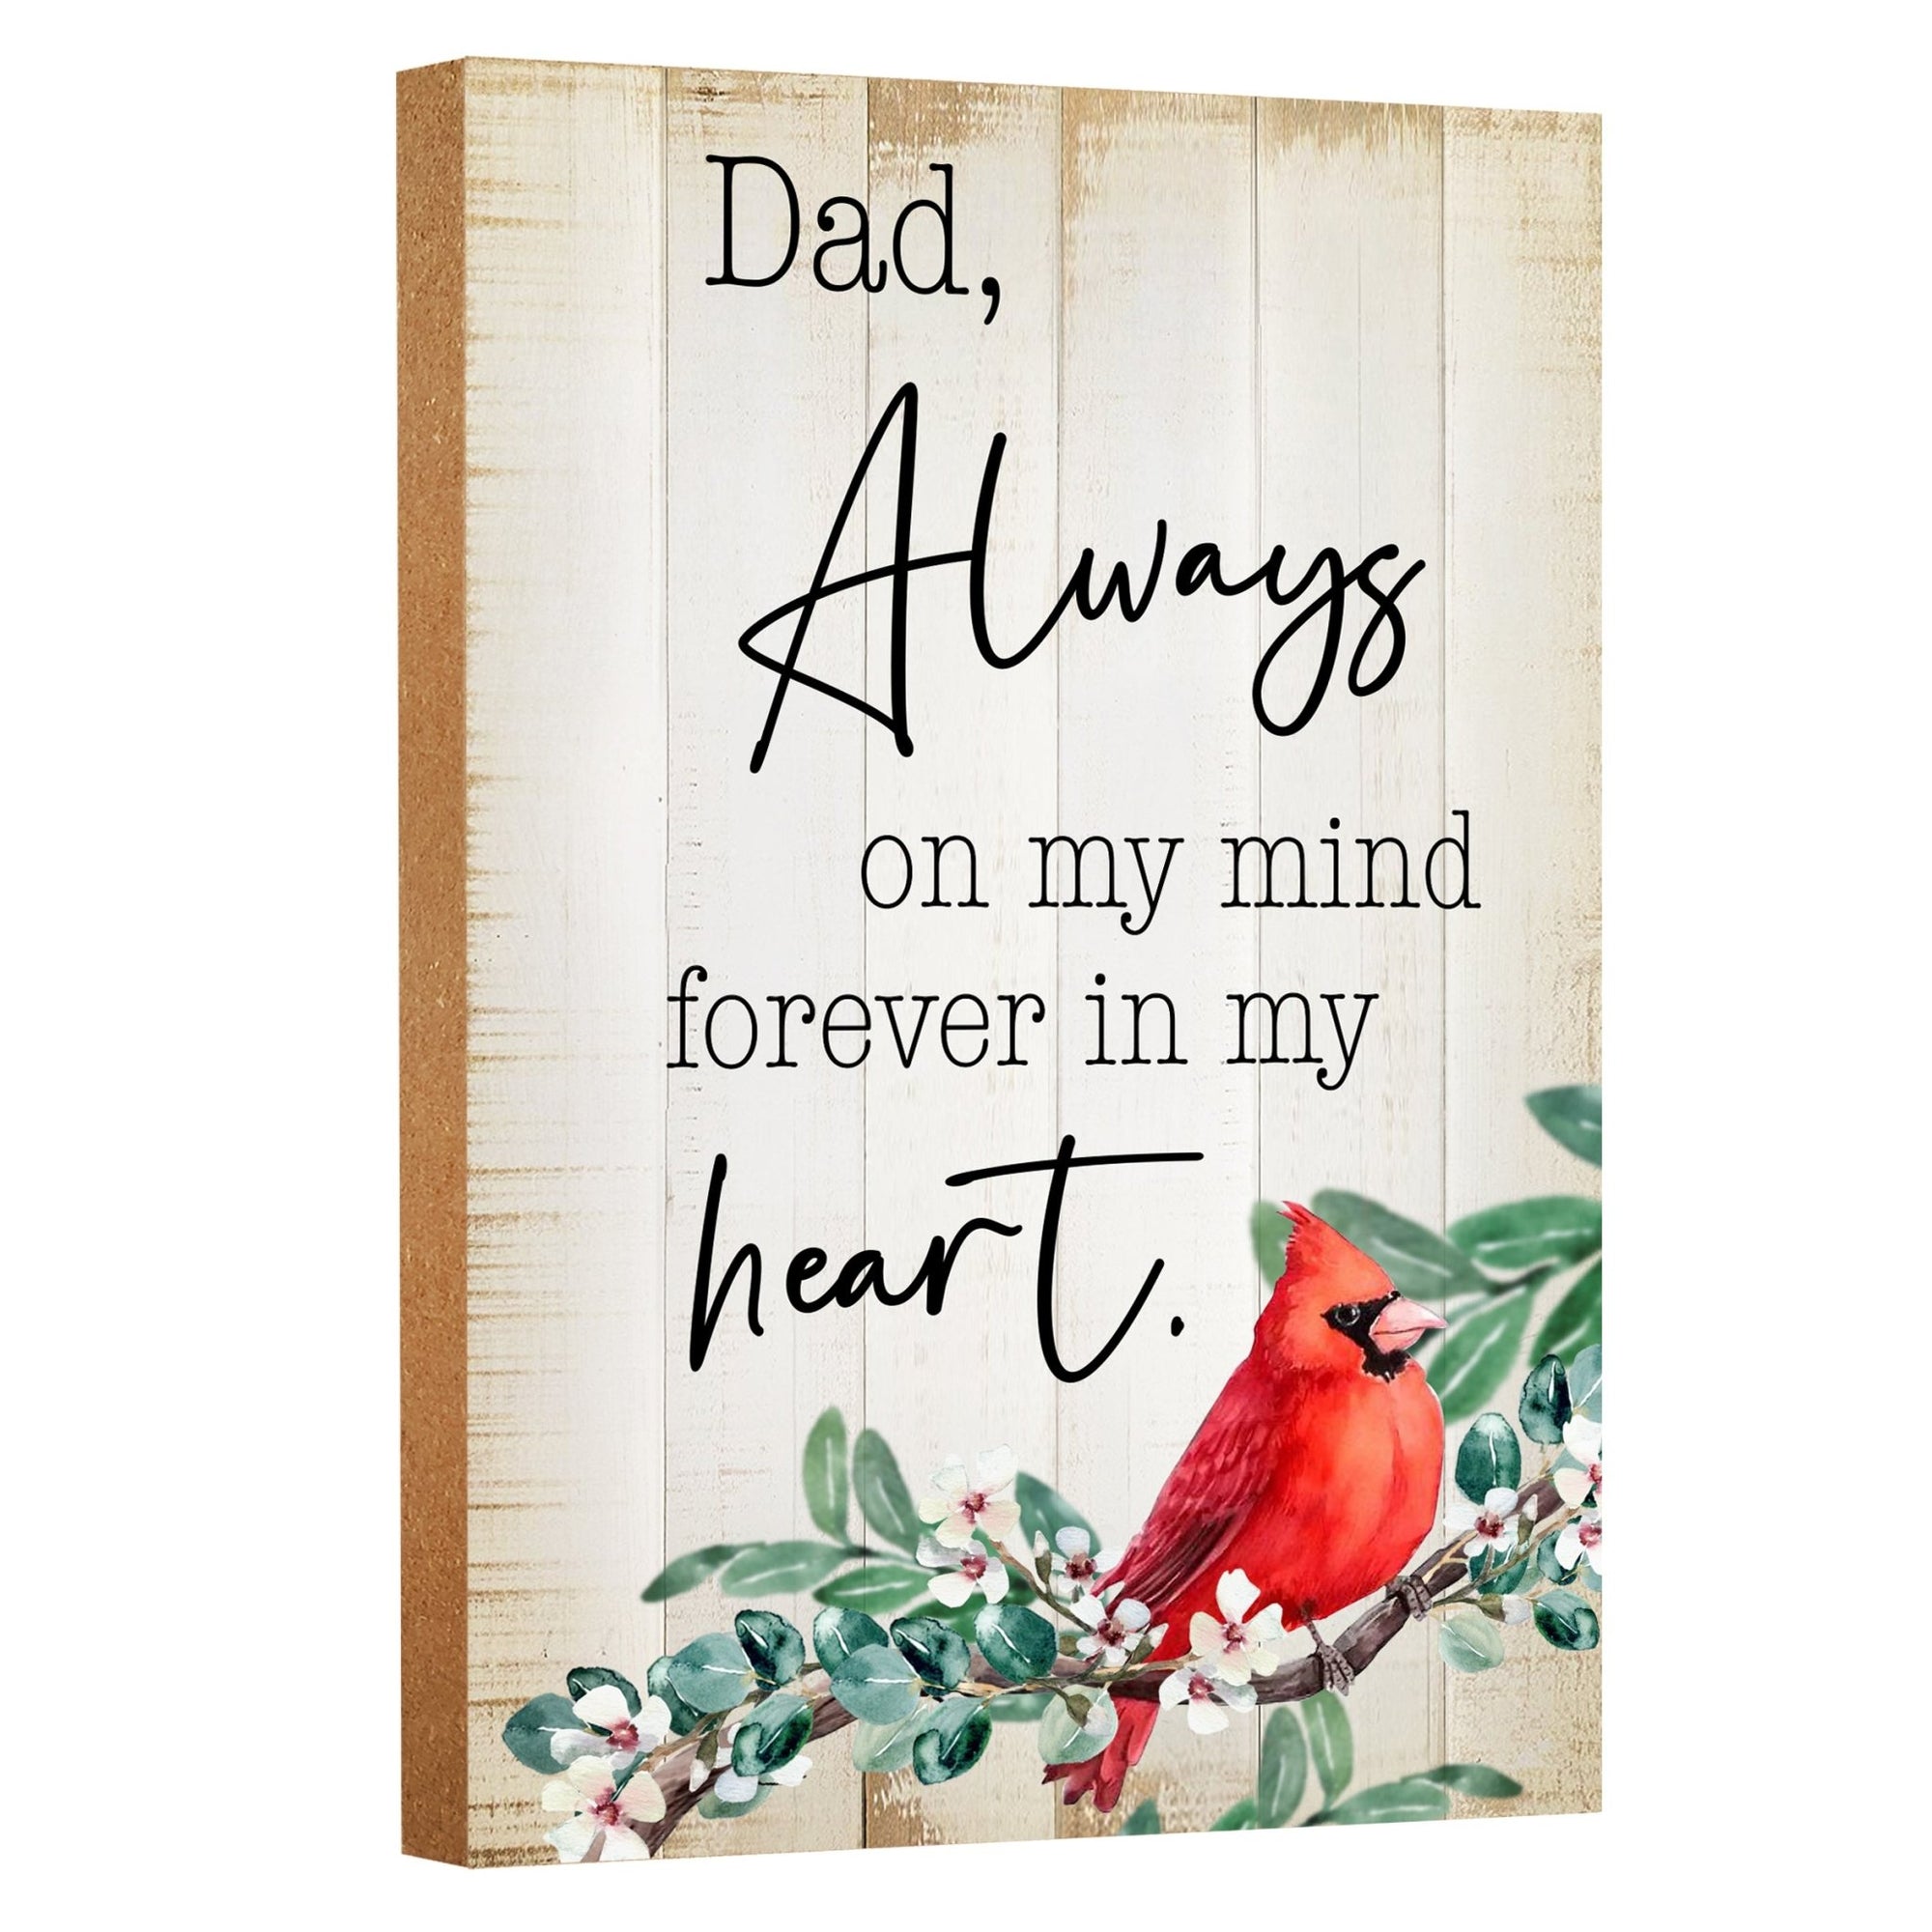 Wooden memorial shelf decor and tabletop memorial decorations to cherish the memory of a loved one.